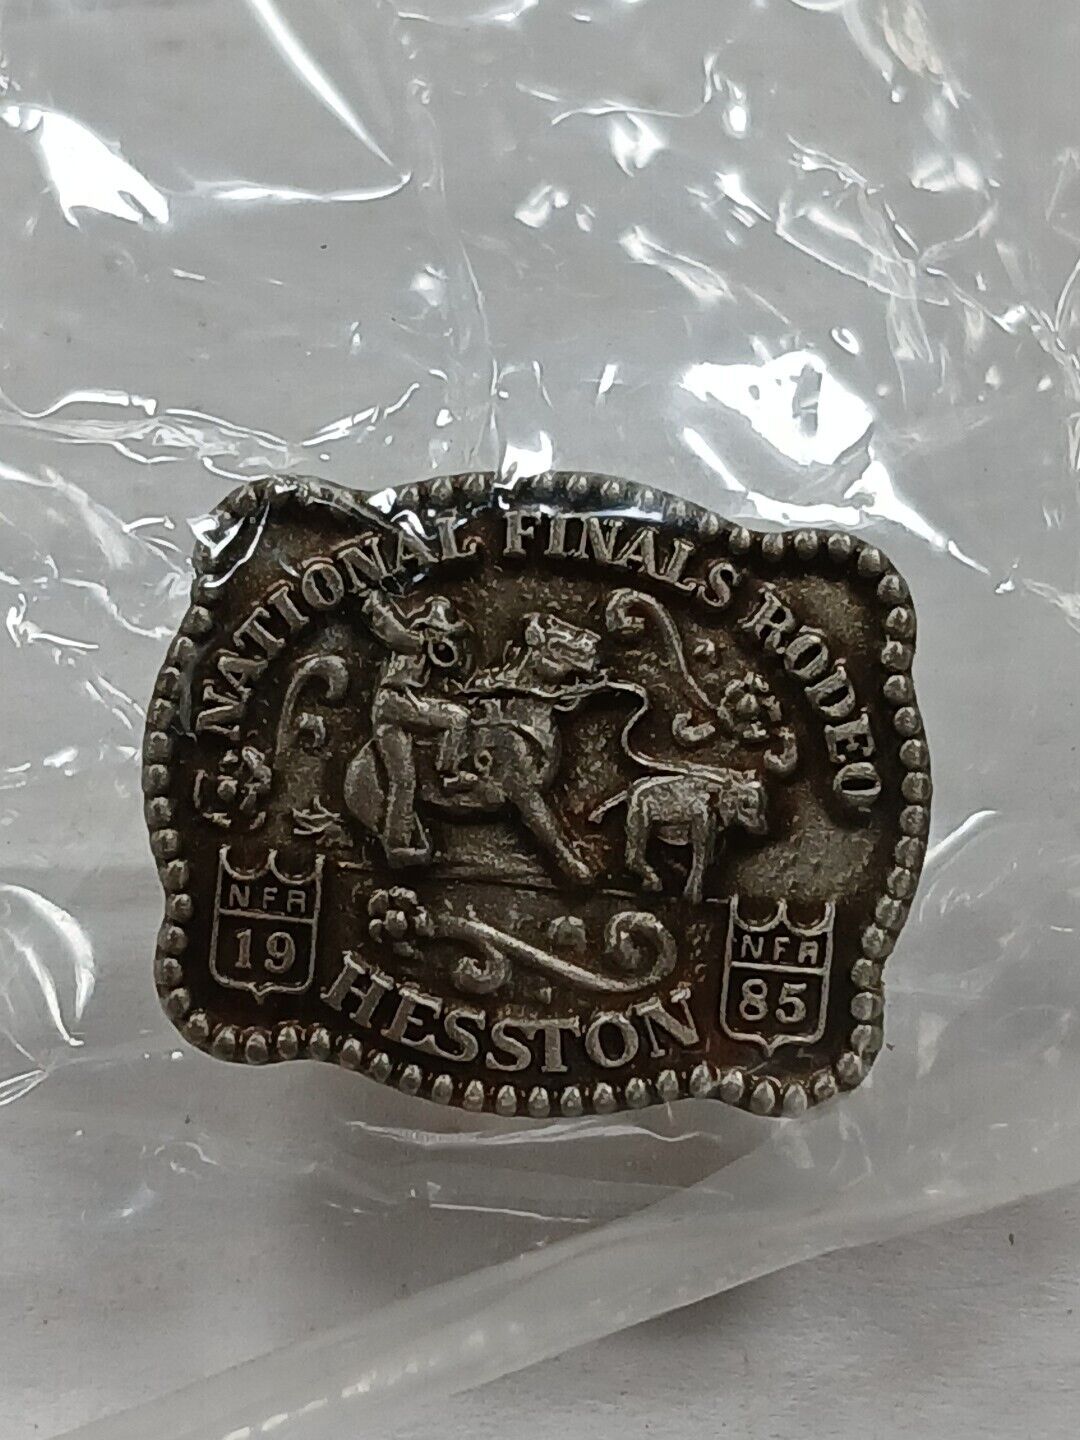 *Hesston 1985 NFR National Finals Rodeo CALF ROPING Collector Hat Lapel Pin Tac